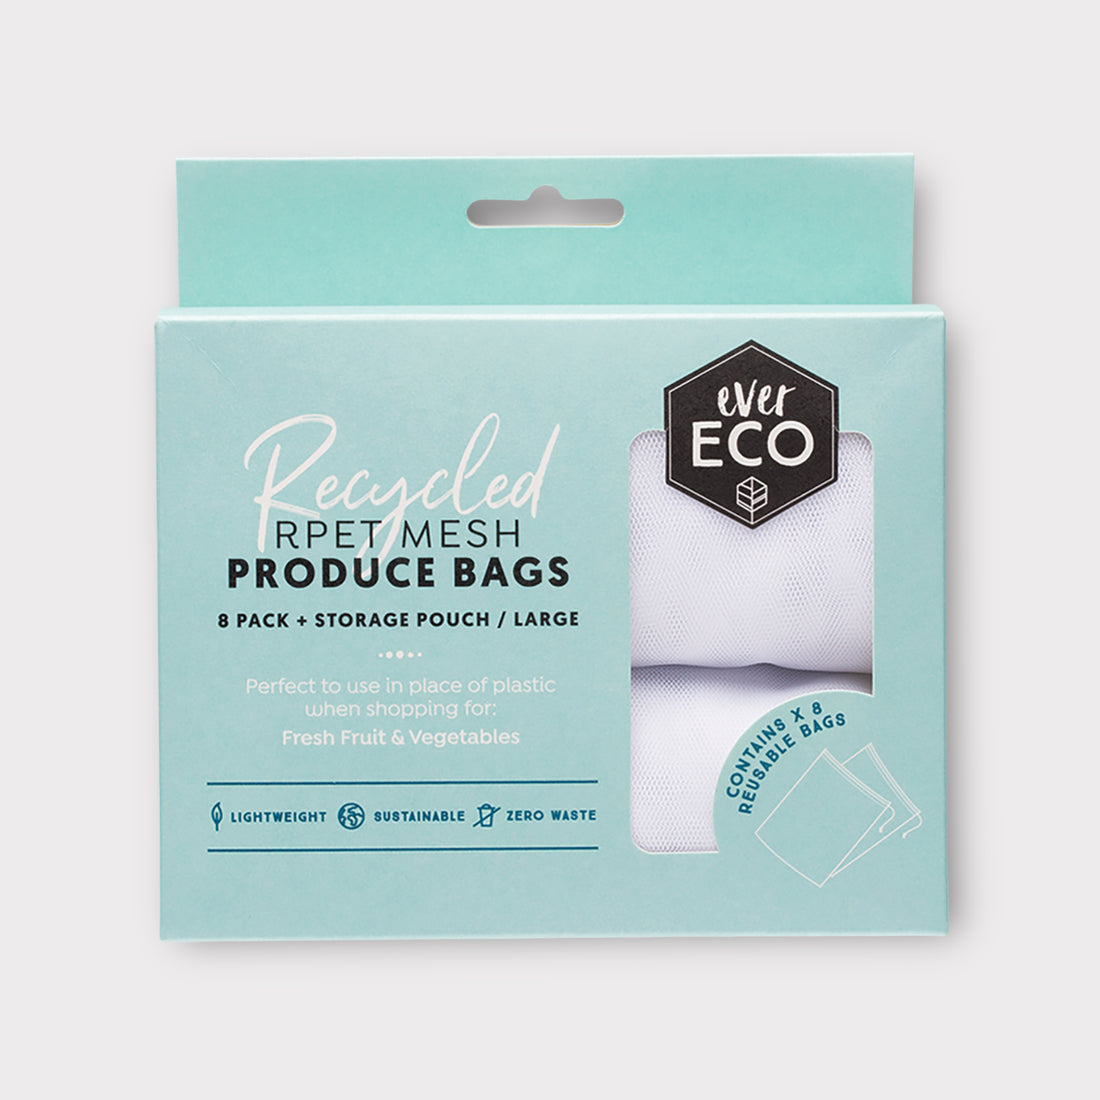 EverEco Recycled RPET Mesh Product Bags